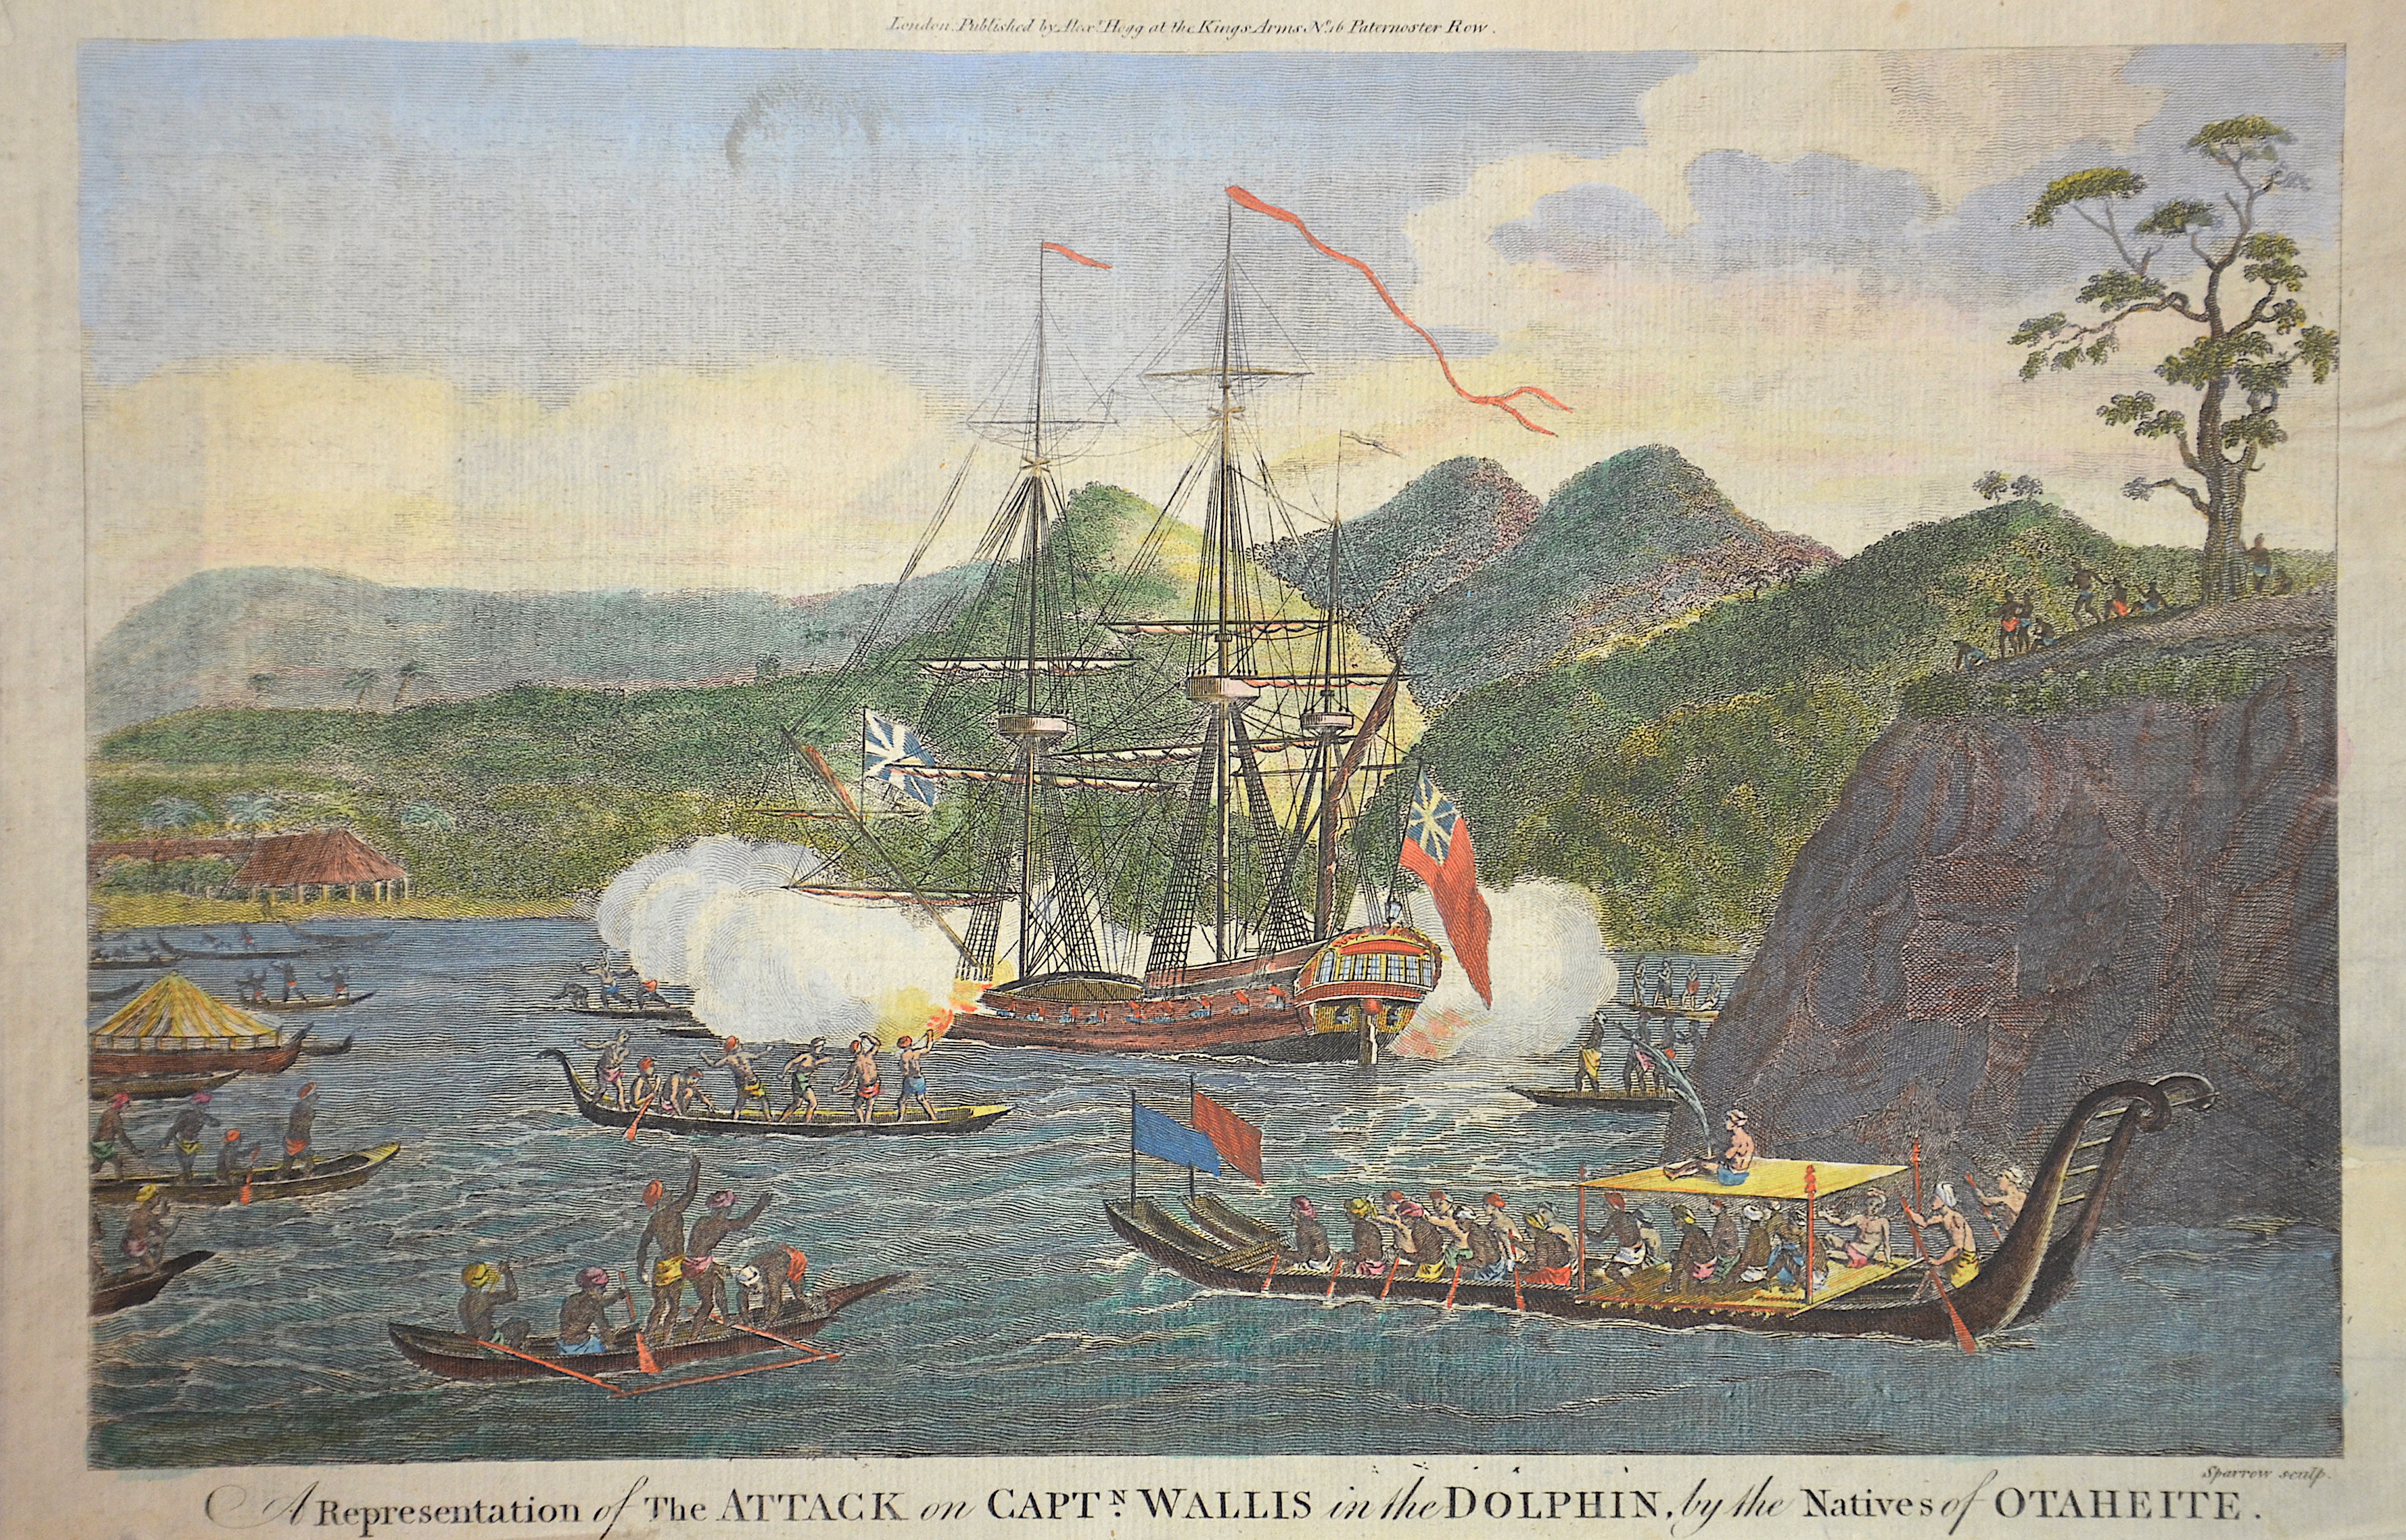 Hogg  A Representation of The Attack on Captn. Wallis in the Dolphin, by the Natives of Otaheite.